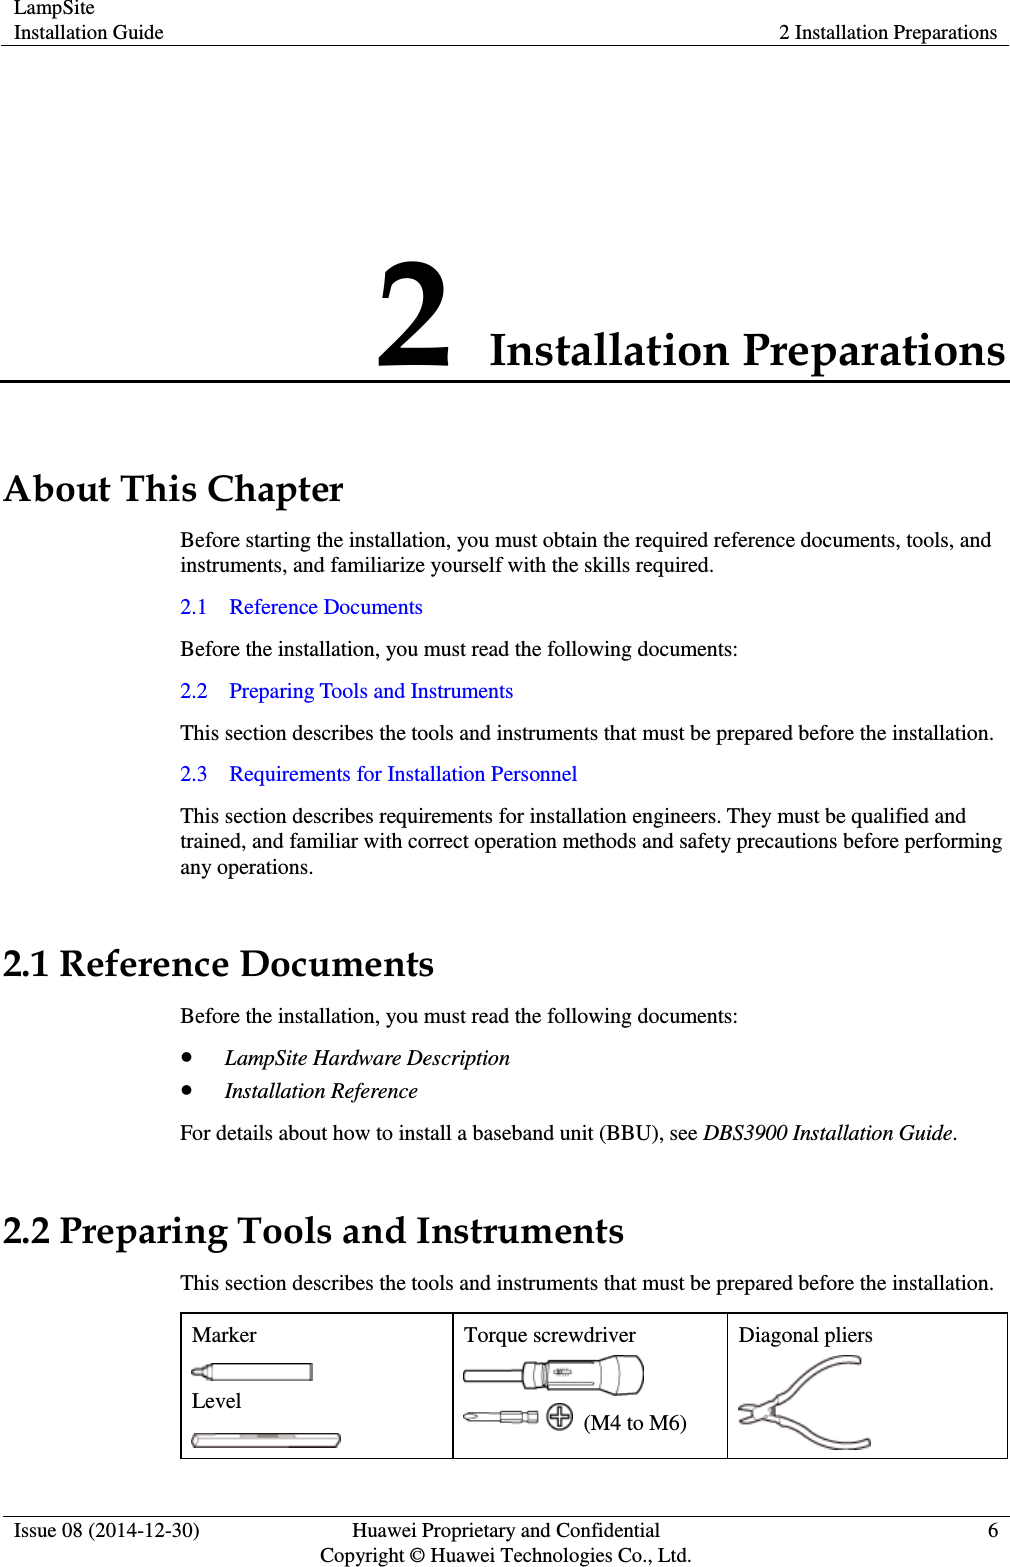 LampSite Installation Guide 2 Installation Preparations  Issue 08 (2014-12-30) Huawei Proprietary and Confidential                                     Copyright © Huawei Technologies Co., Ltd. 6  2 Installation Preparations About This Chapter Before starting the installation, you must obtain the required reference documents, tools, and instruments, and familiarize yourself with the skills required.   2.1    Reference Documents Before the installation, you must read the following documents:   2.2    Preparing Tools and Instruments This section describes the tools and instruments that must be prepared before the installation.   2.3    Requirements for Installation Personnel This section describes requirements for installation engineers. They must be qualified and trained, and familiar with correct operation methods and safety precautions before performing any operations.   2.1 Reference Documents Before the installation, you must read the following documents:    LampSite Hardware Description  Installation Reference For details about how to install a baseband unit (BBU), see DBS3900 Installation Guide.   2.2 Preparing Tools and Instruments This section describes the tools and instruments that must be prepared before the installation.   Marker  Level  Torque screwdriver    (M4 to M6)   Diagonal pliers  